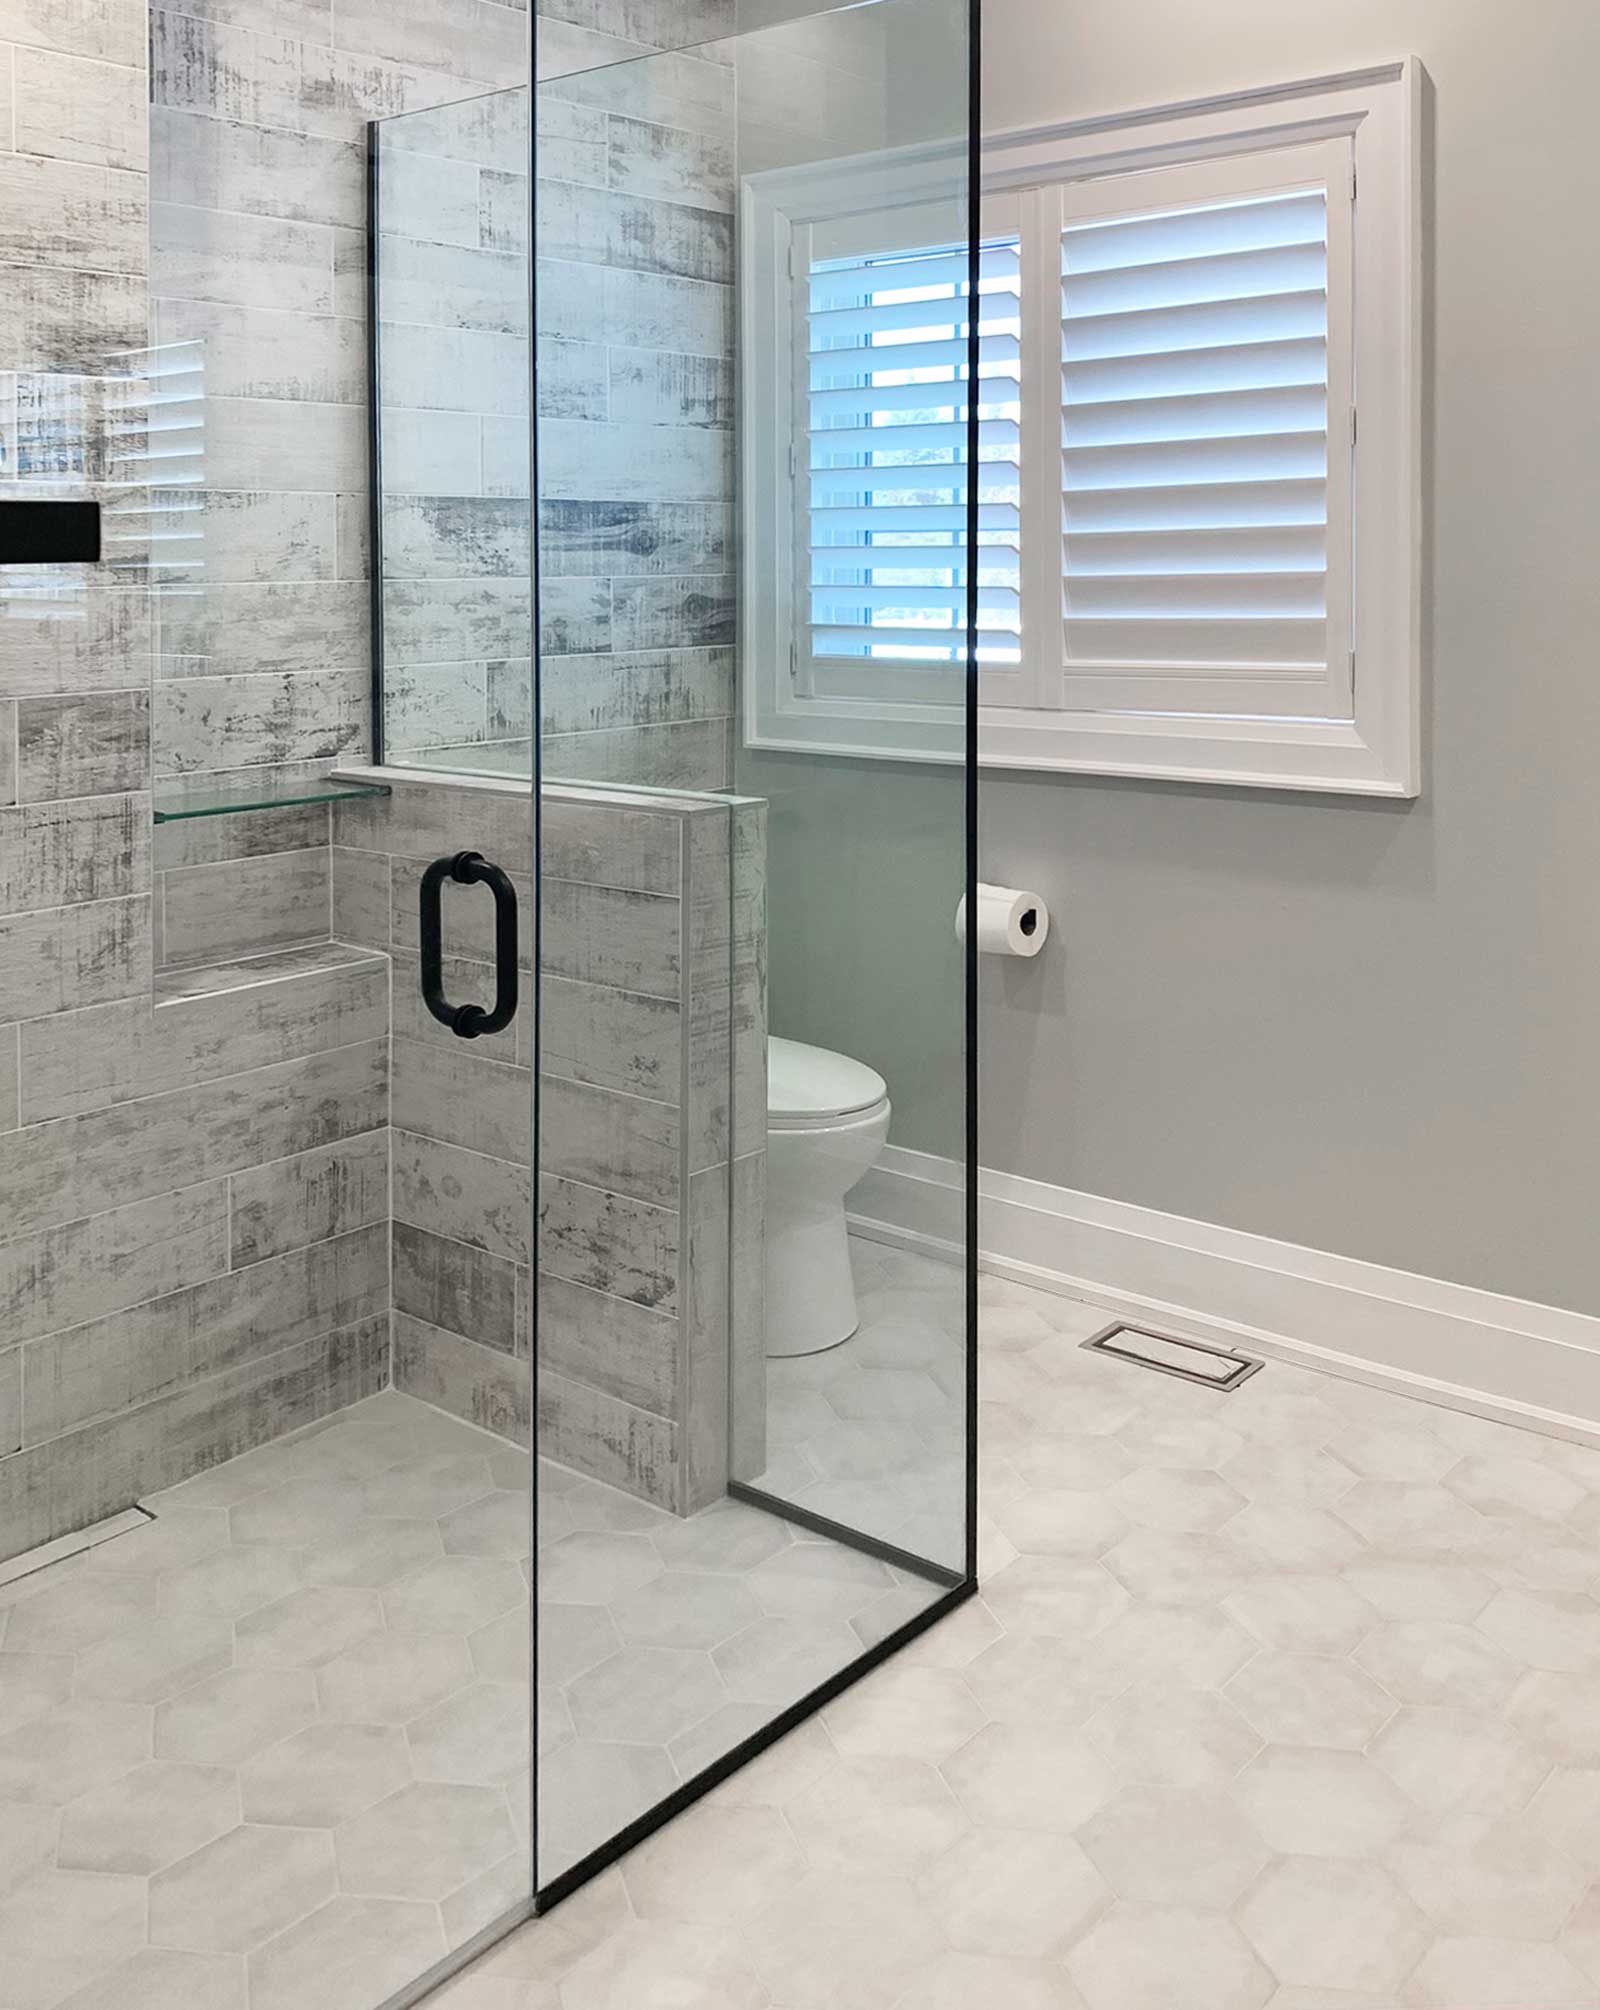 Curbless shower with glass enclosure